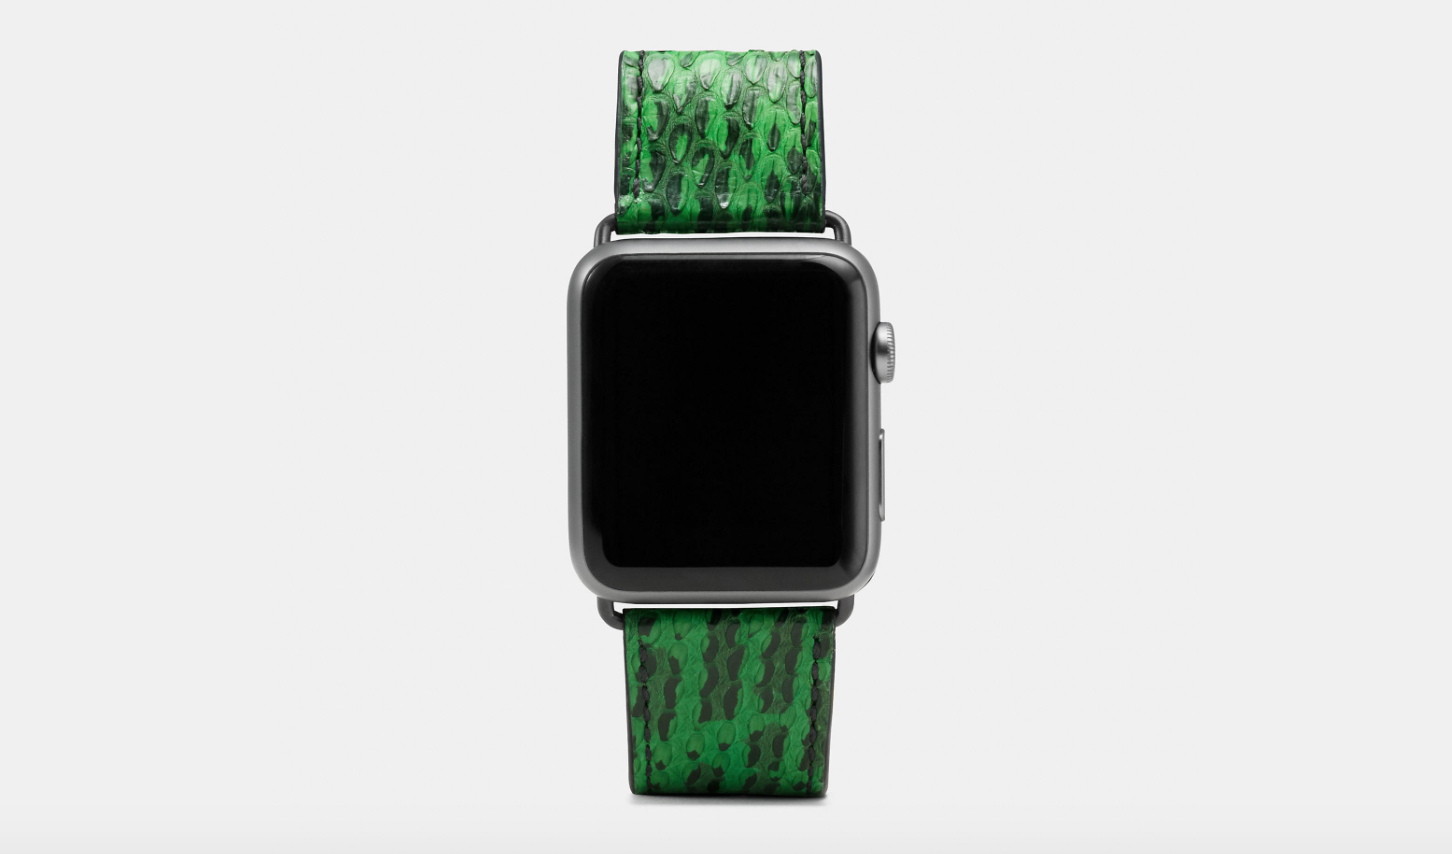 New Coach Apple Watch Bands for Spring, 30 Percent Off